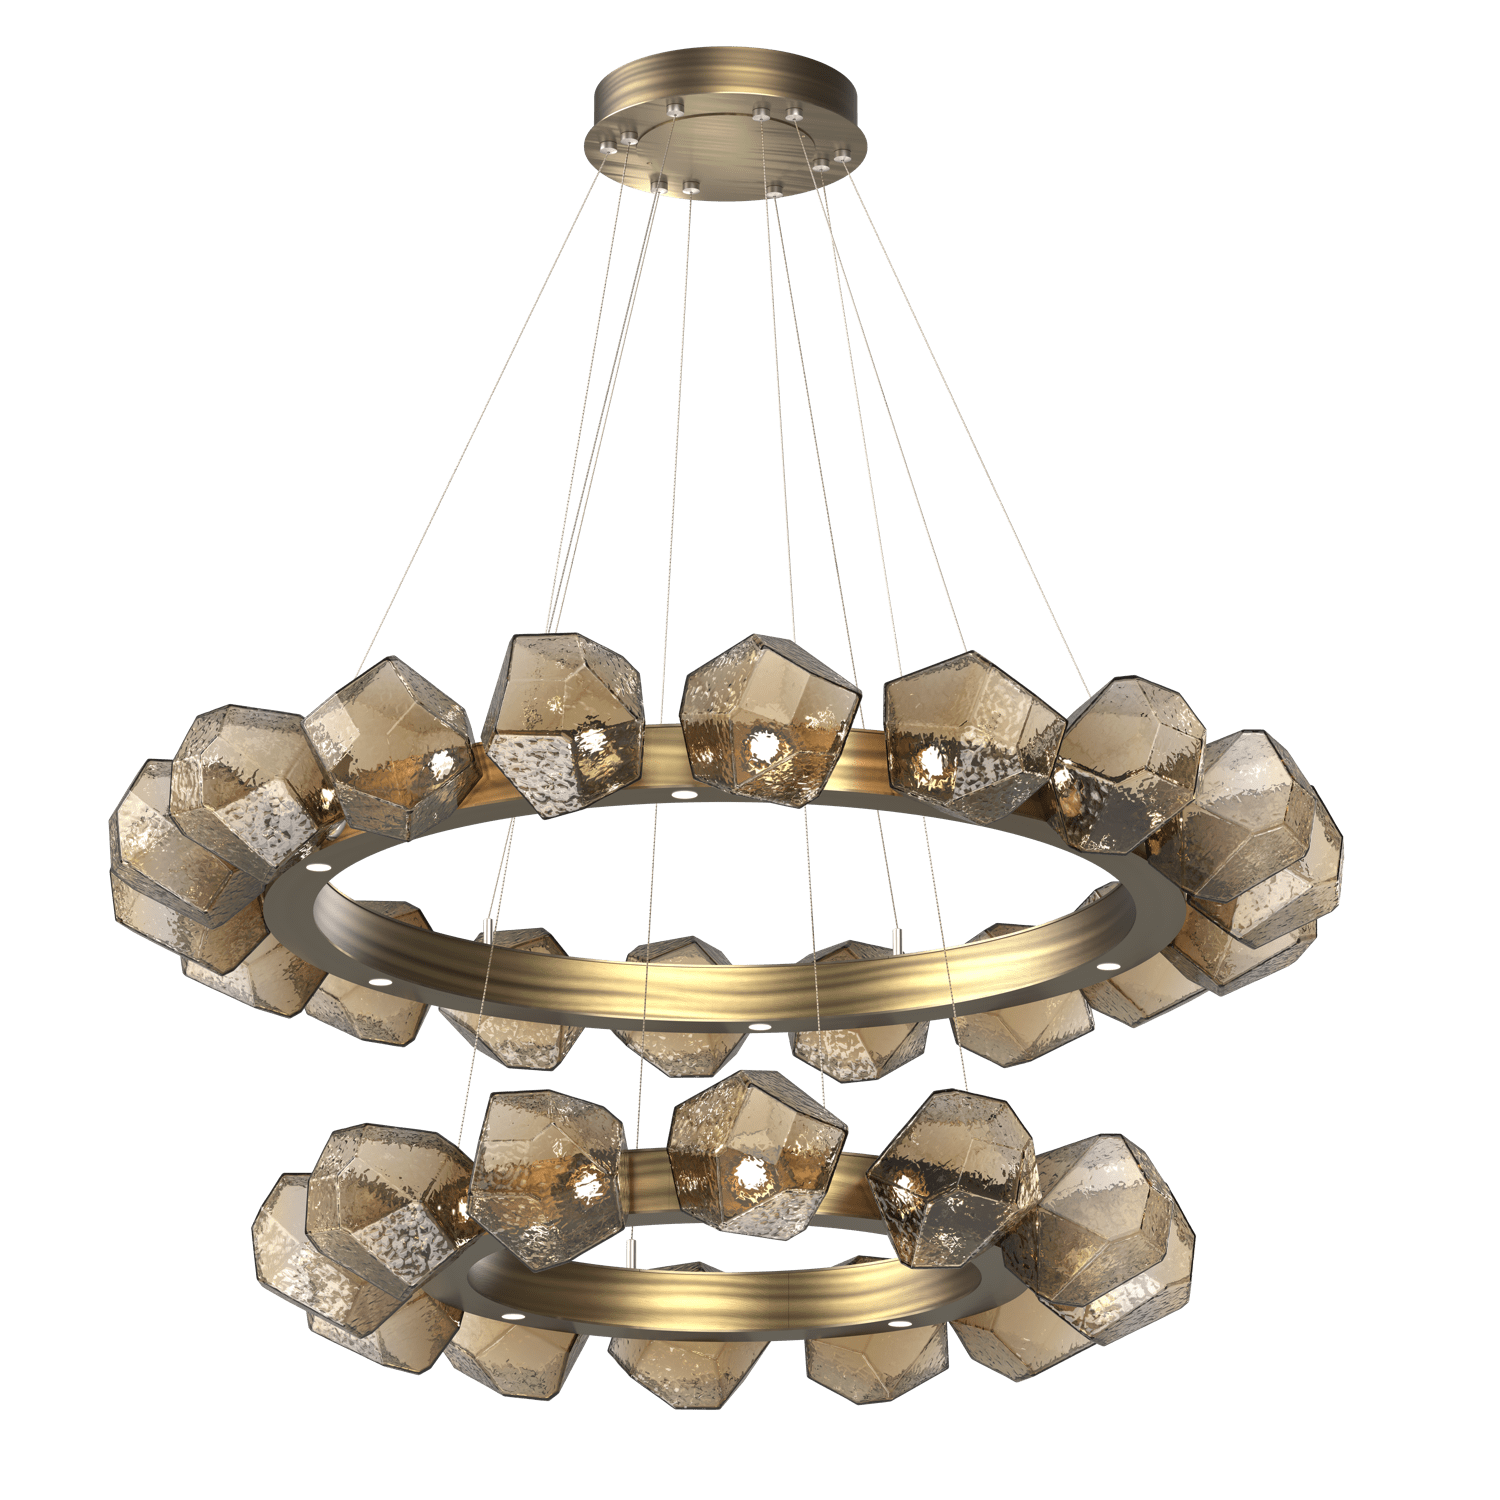 CHB0039-2T-HB-B-Hammerton-Studio-Gem-48-inch-two-tier-radial-ring-chandelier-with-heritage-brass-finish-and-bronze-blown-glass-shades-and-LED-lamping